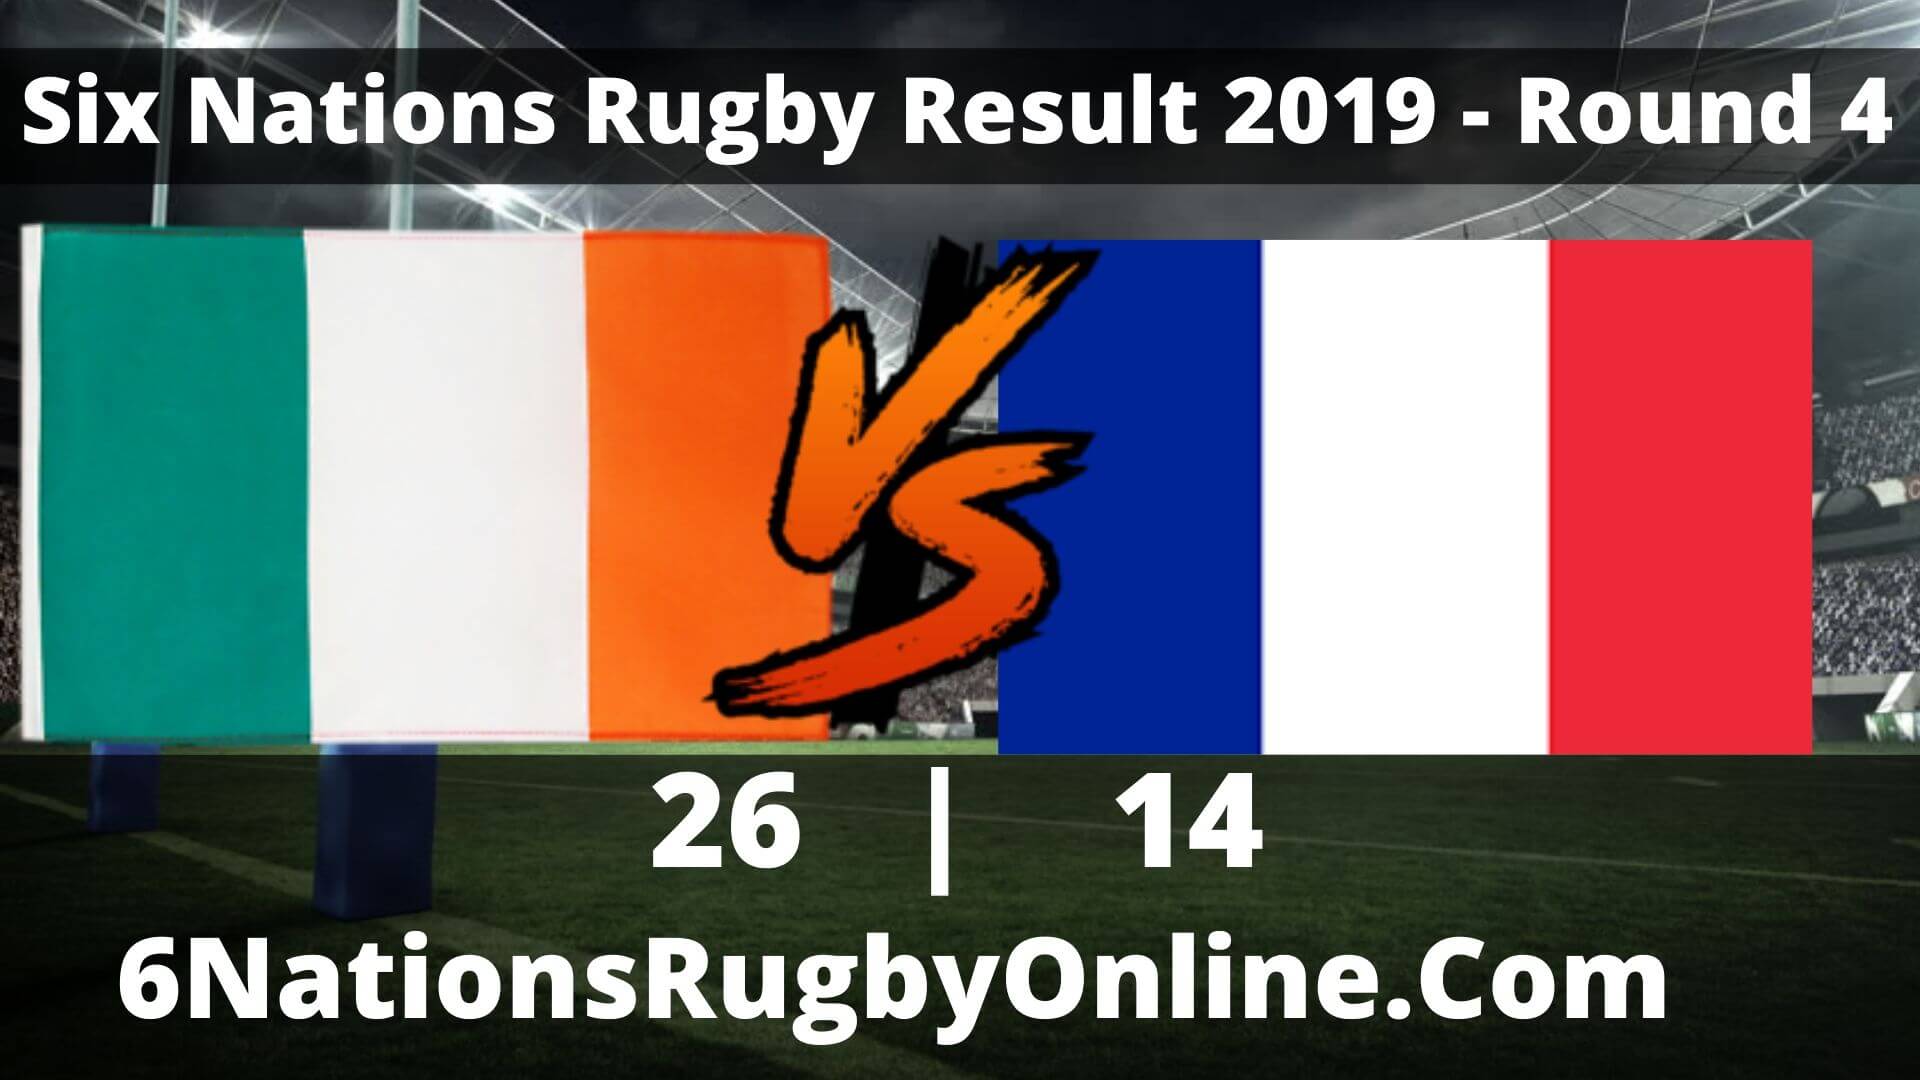 IRELAND FRANCE Results 2019 | SIX NATIONS RUGBY ROUND 4